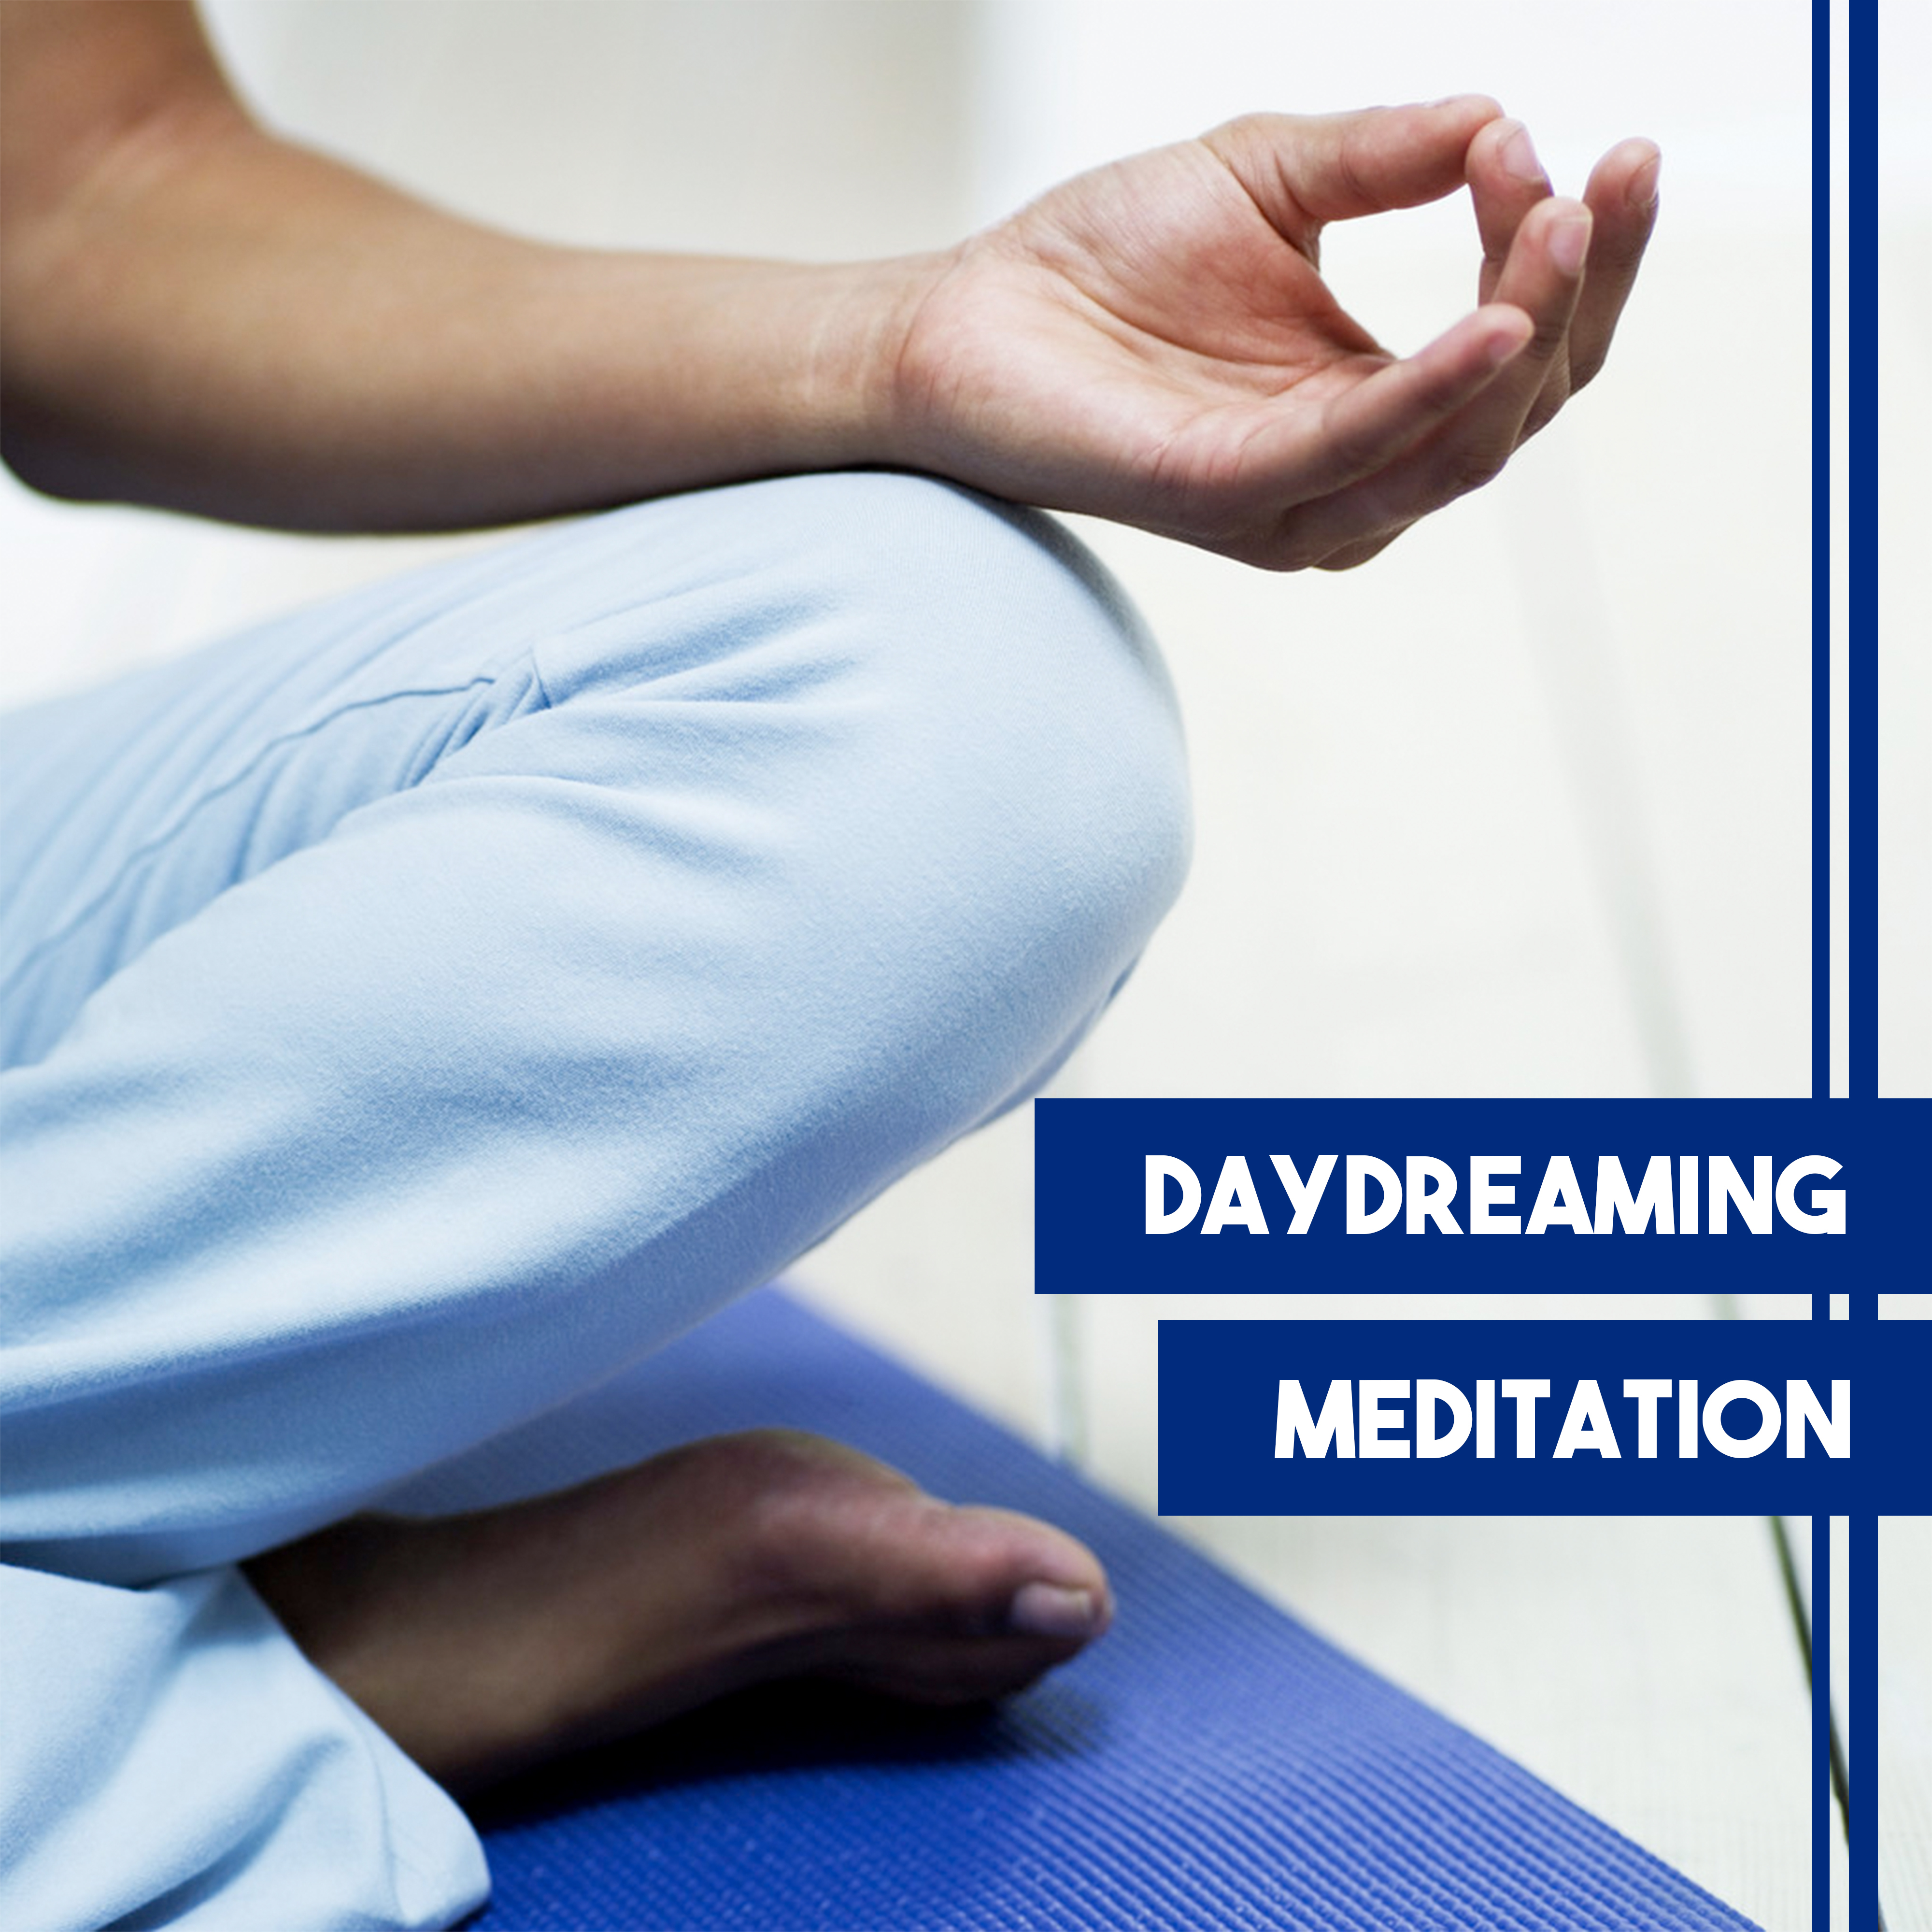 Daydreaming Meditation – Ultimate Meditation Music, Yoga, Pilates, Contemplation, Relax, Sounds of Nature